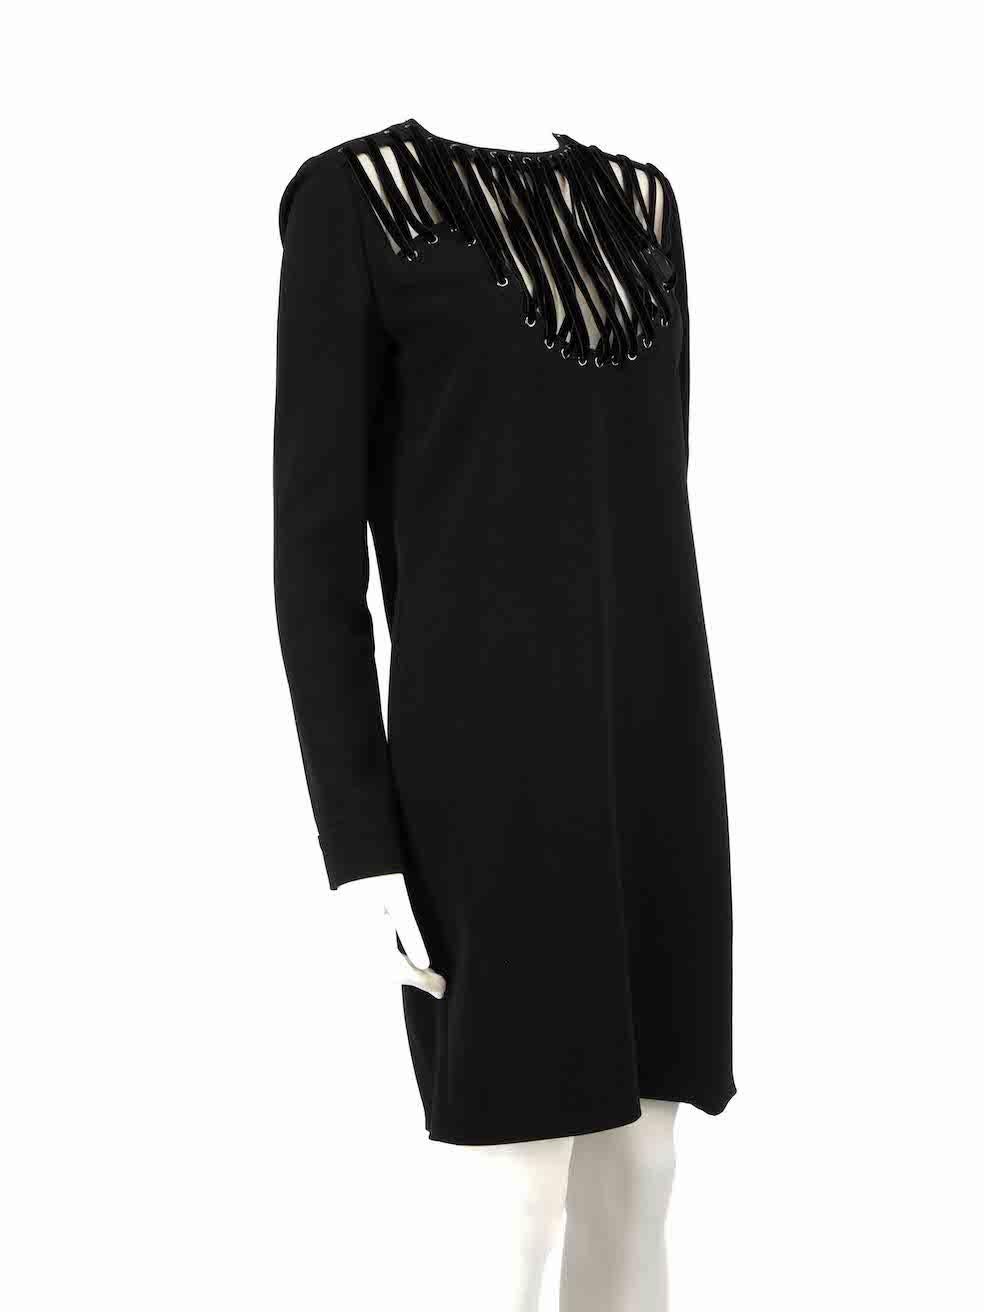 CONDITION is Very good. Hardly any visible wear to dress is evident on this used Tom Ford designer resale item.
 
 
 
 Details
 
 
 Black
 
 Viscose
 
 Dress
 
 Long sleeves
 
 Knee length
 
 Round neck
 
 Front velvet lace up detail
 
 Back zip and